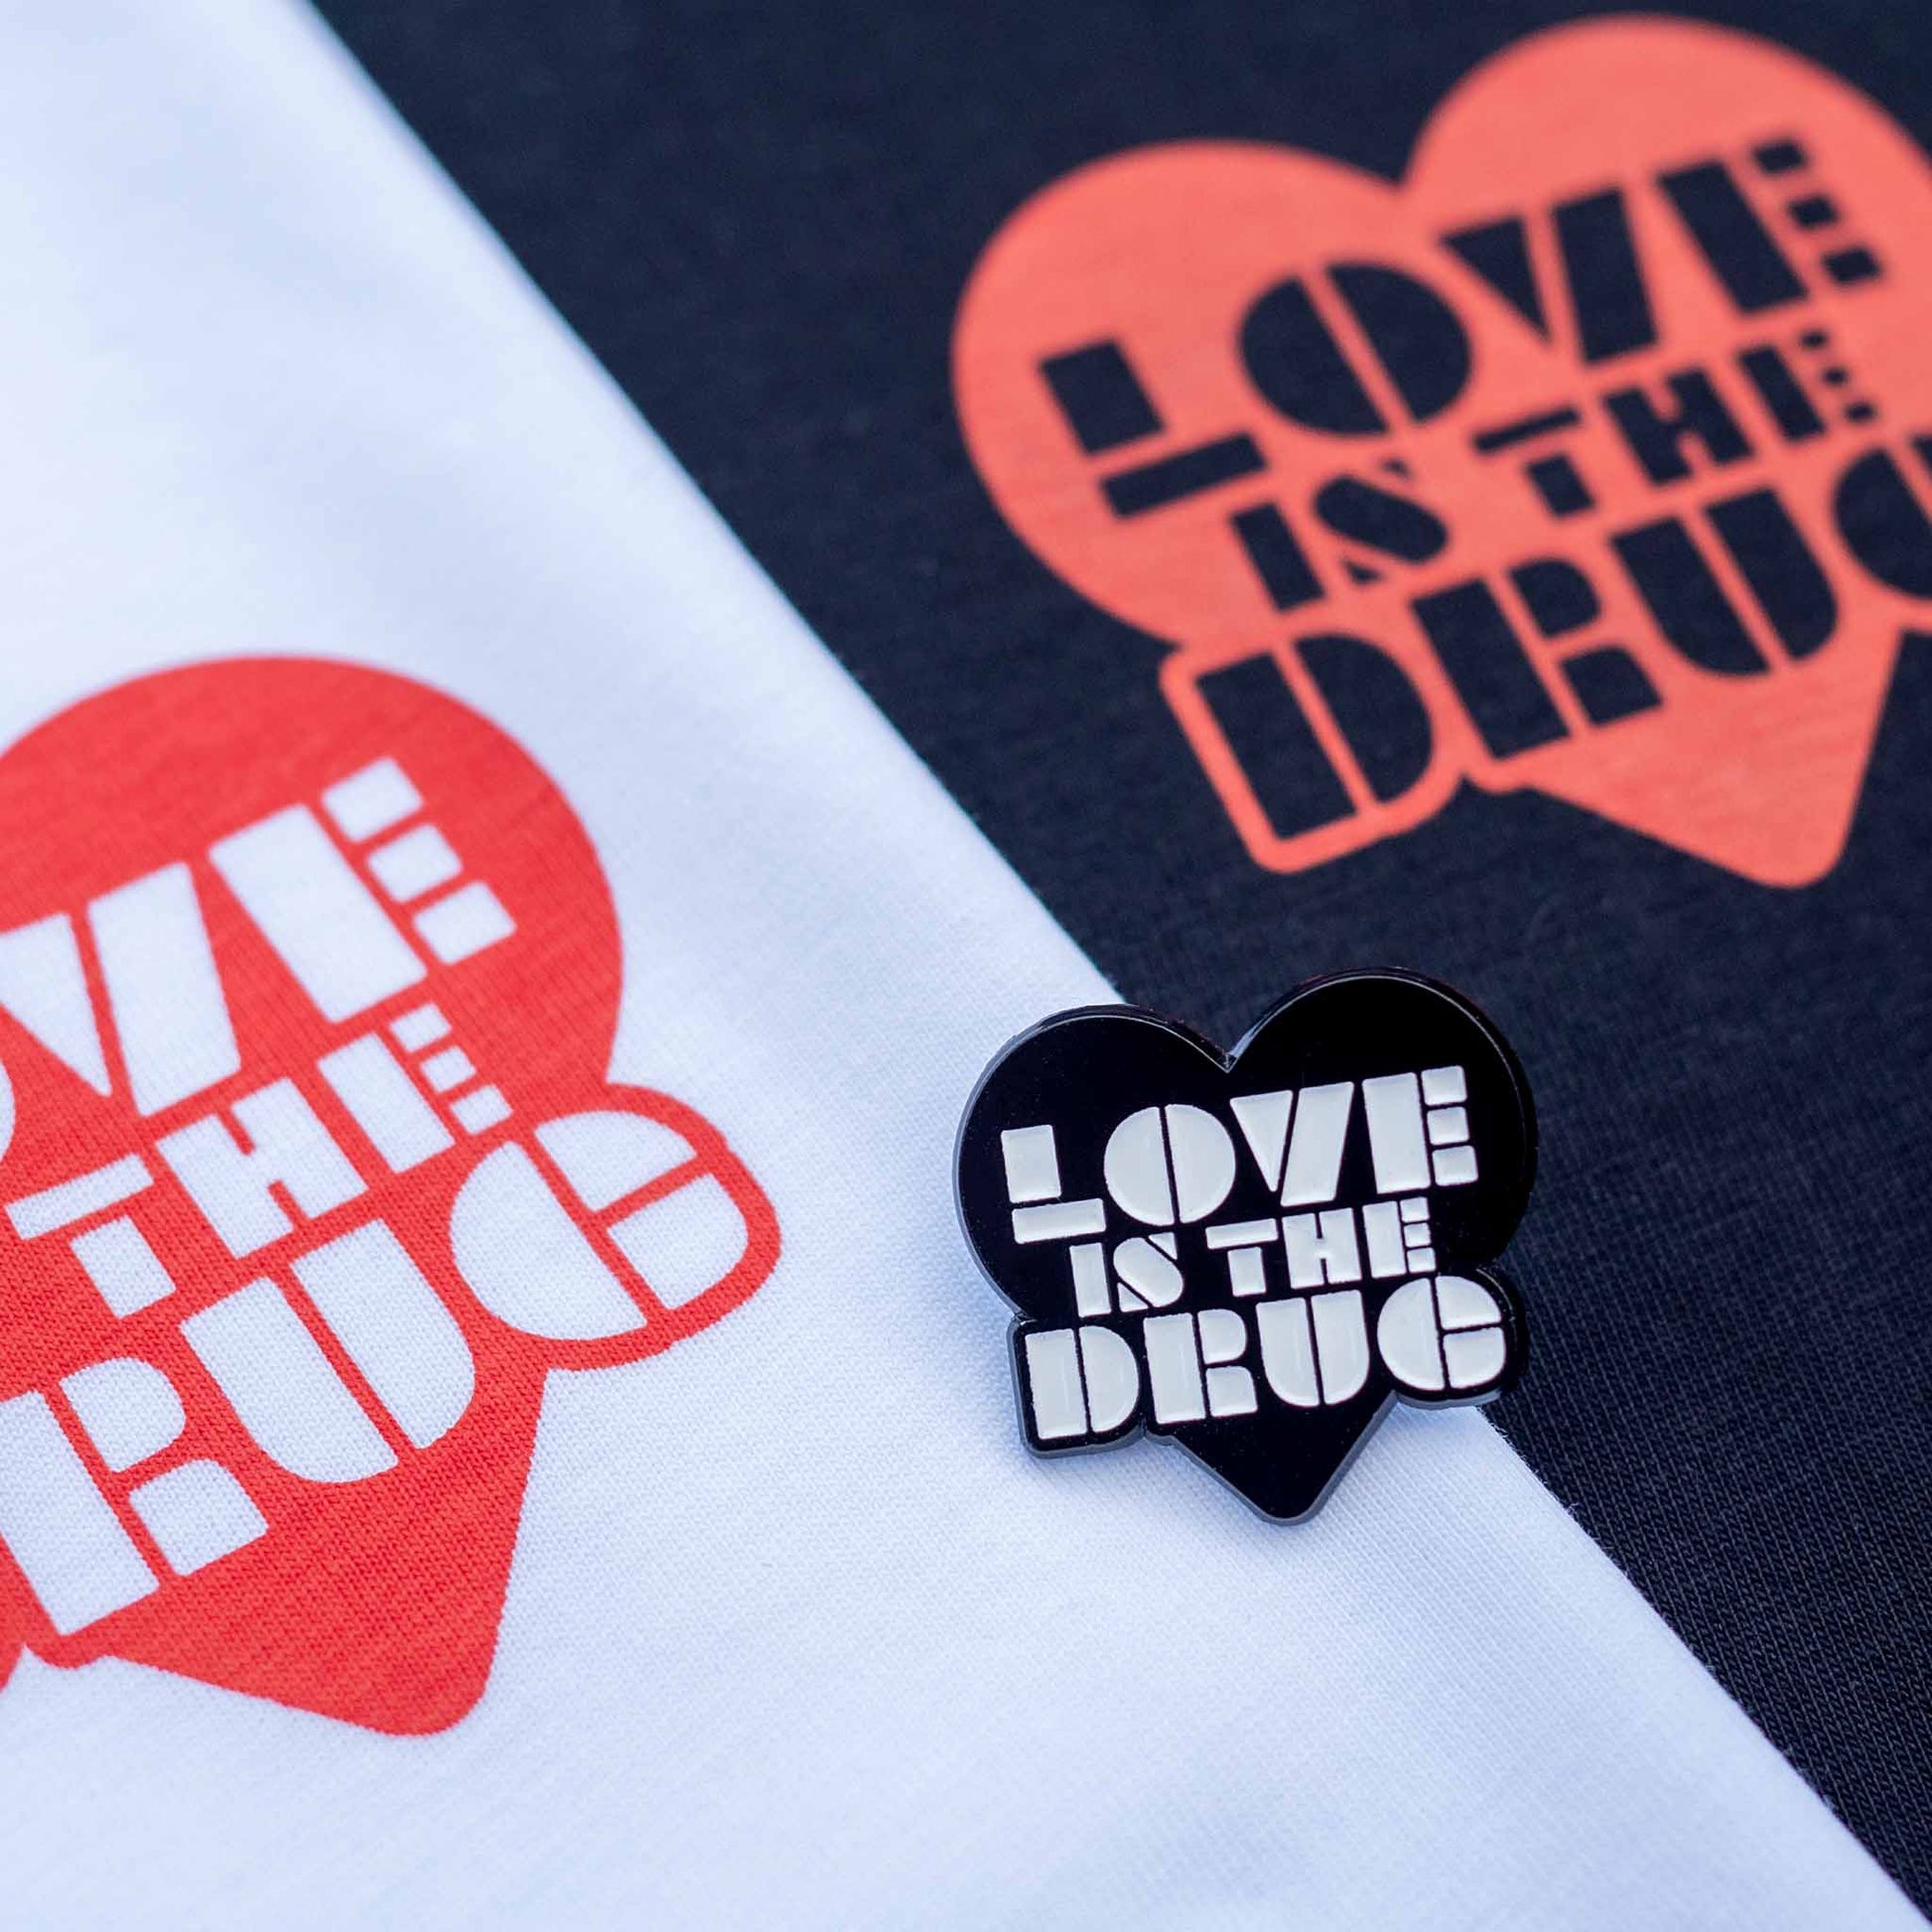 Love is the drug black and white t-shirt and matching pin badge